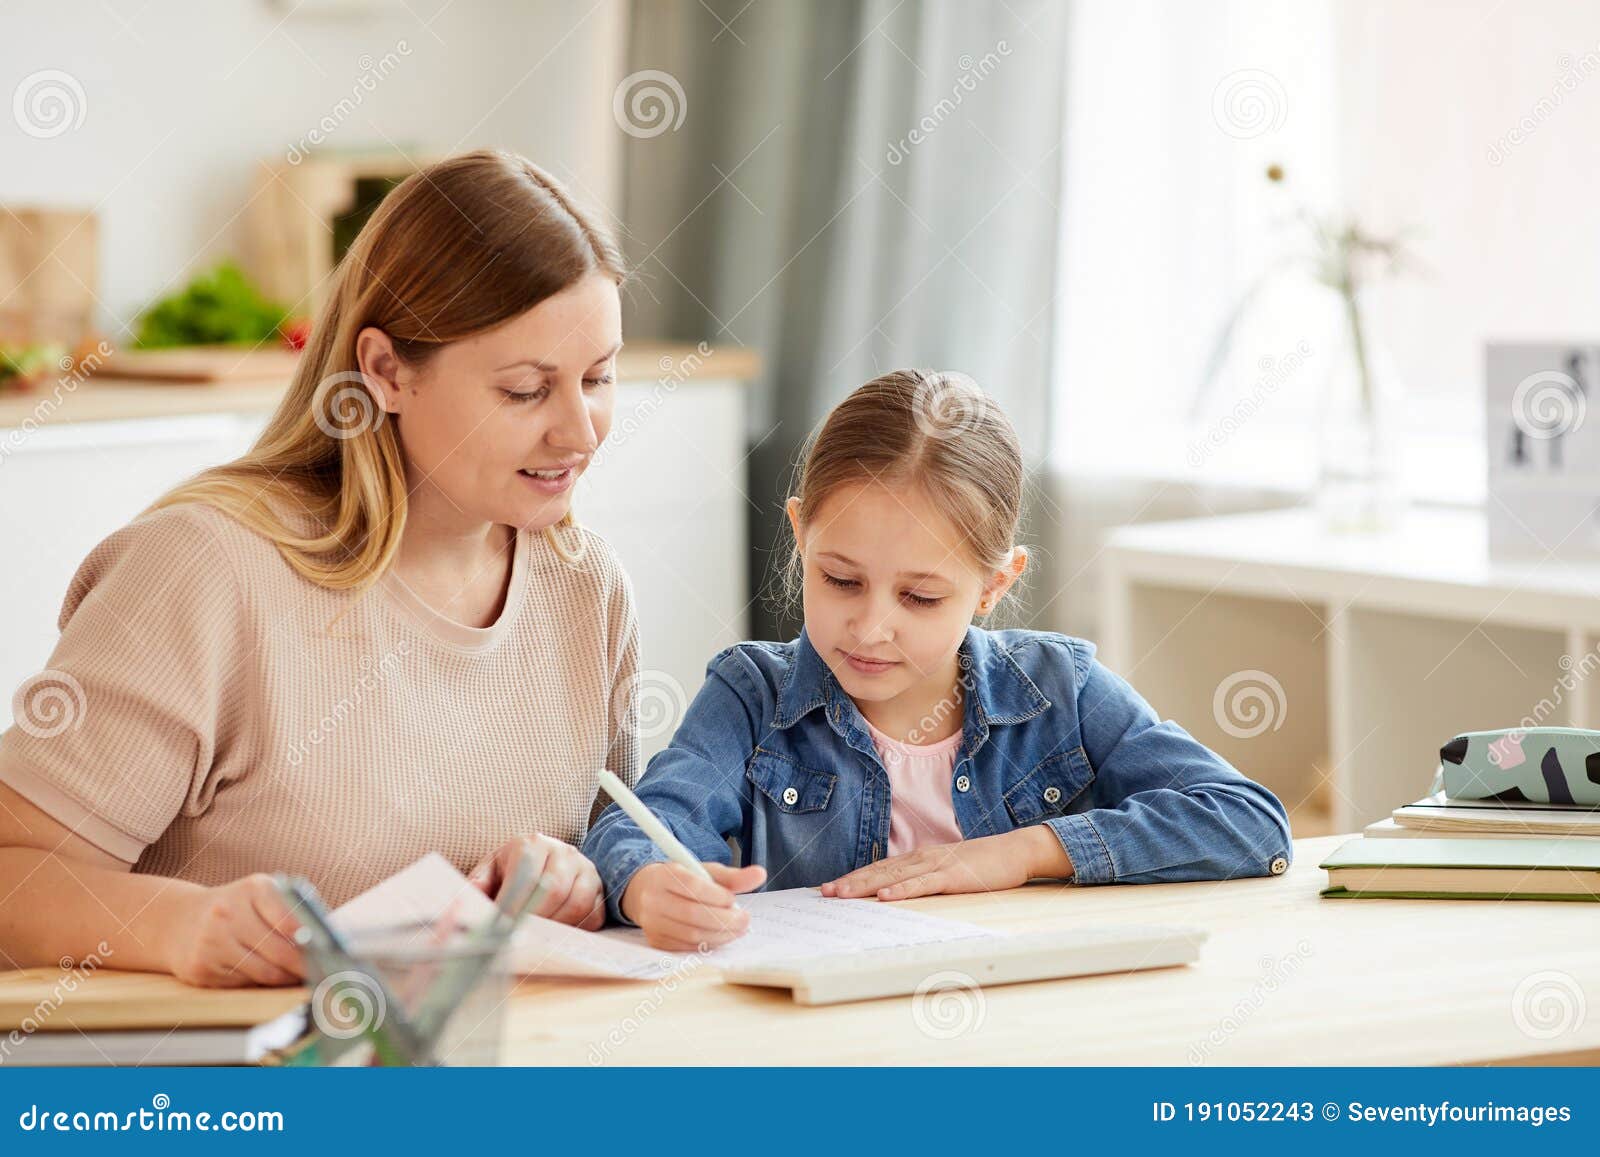 mother and daughter studying at home